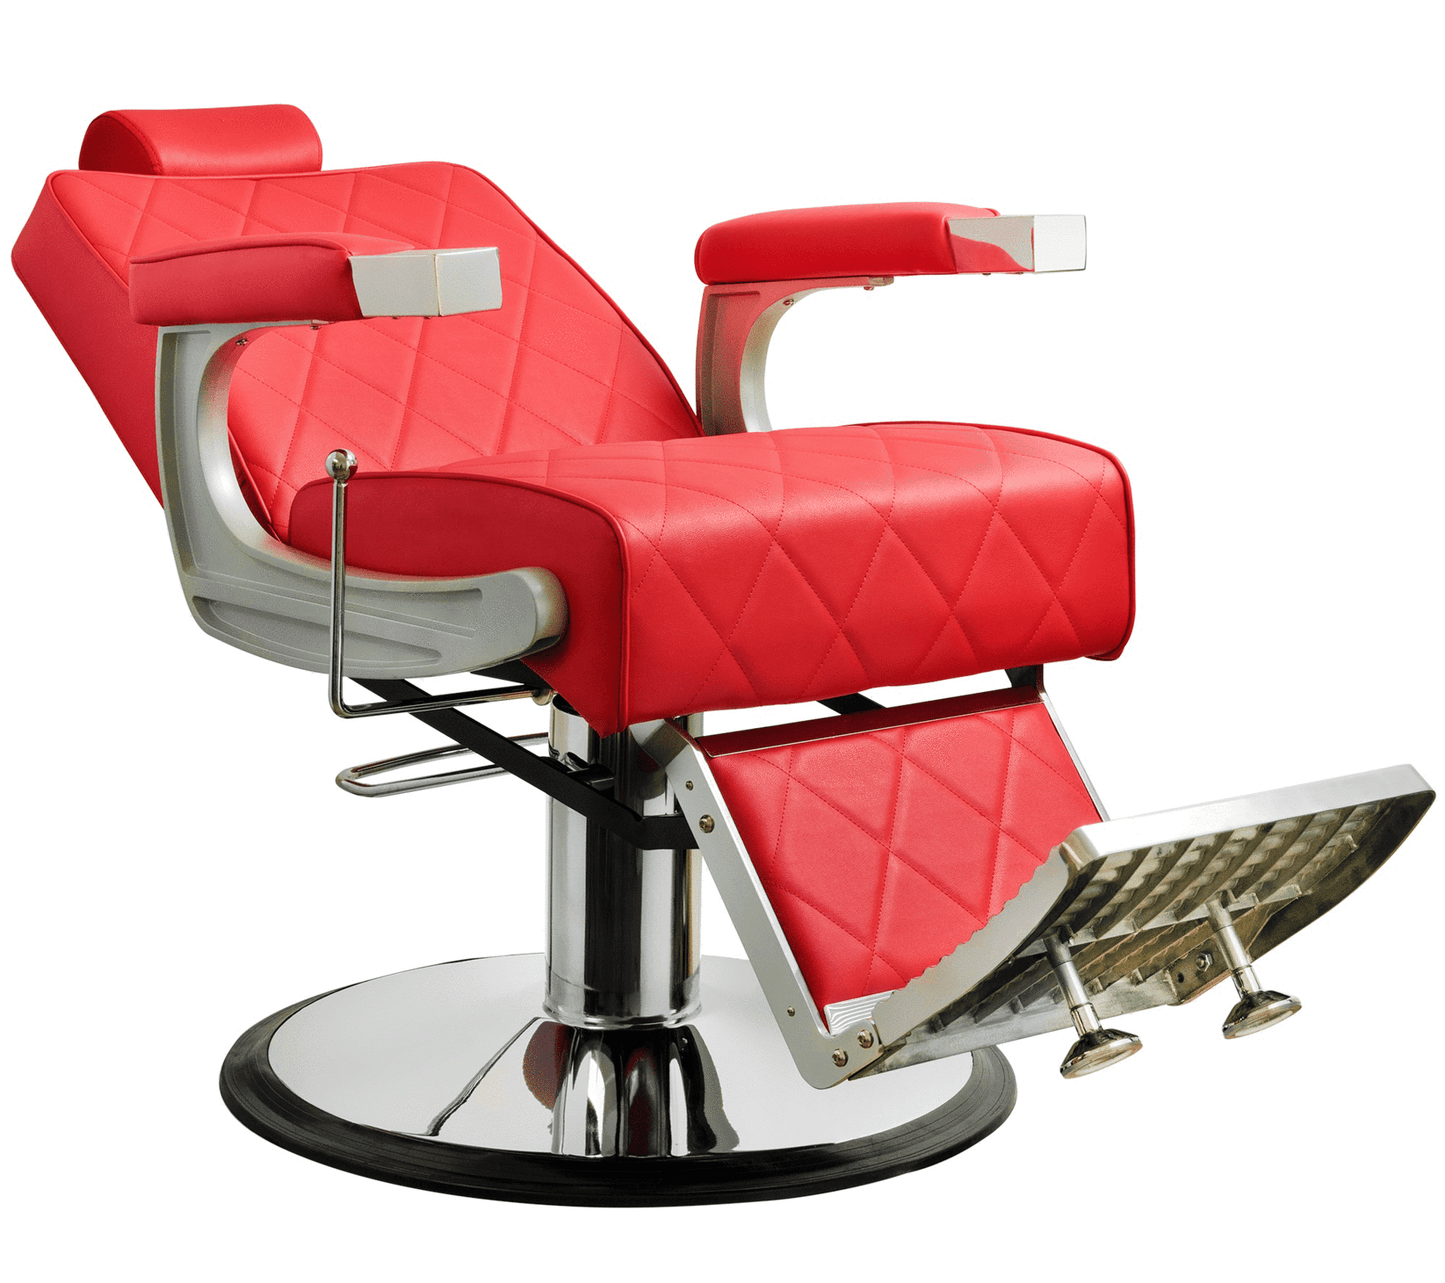 The King Barber Chair "Red"